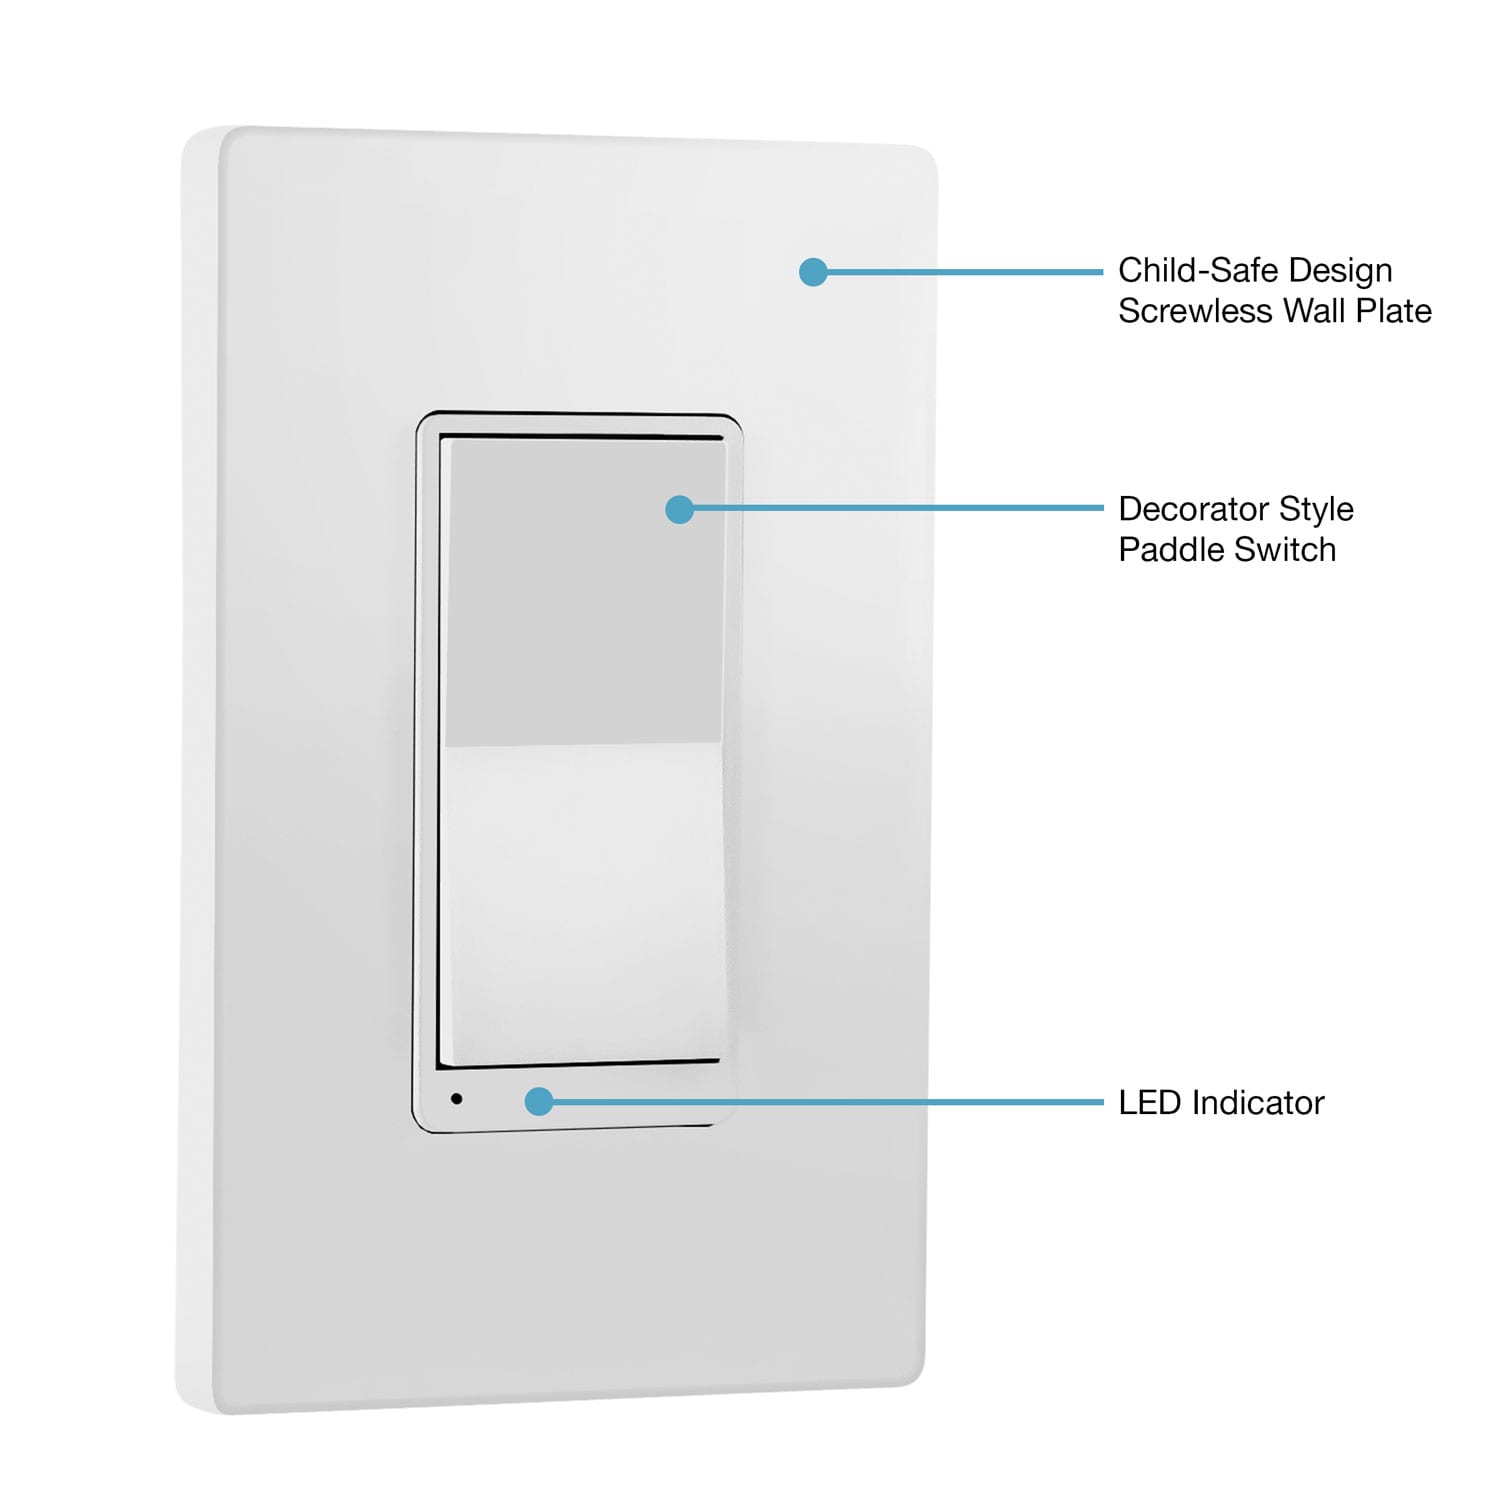 In-Wall 3-Way/4-Way Add-On Wi-Fi Dimmer Switch